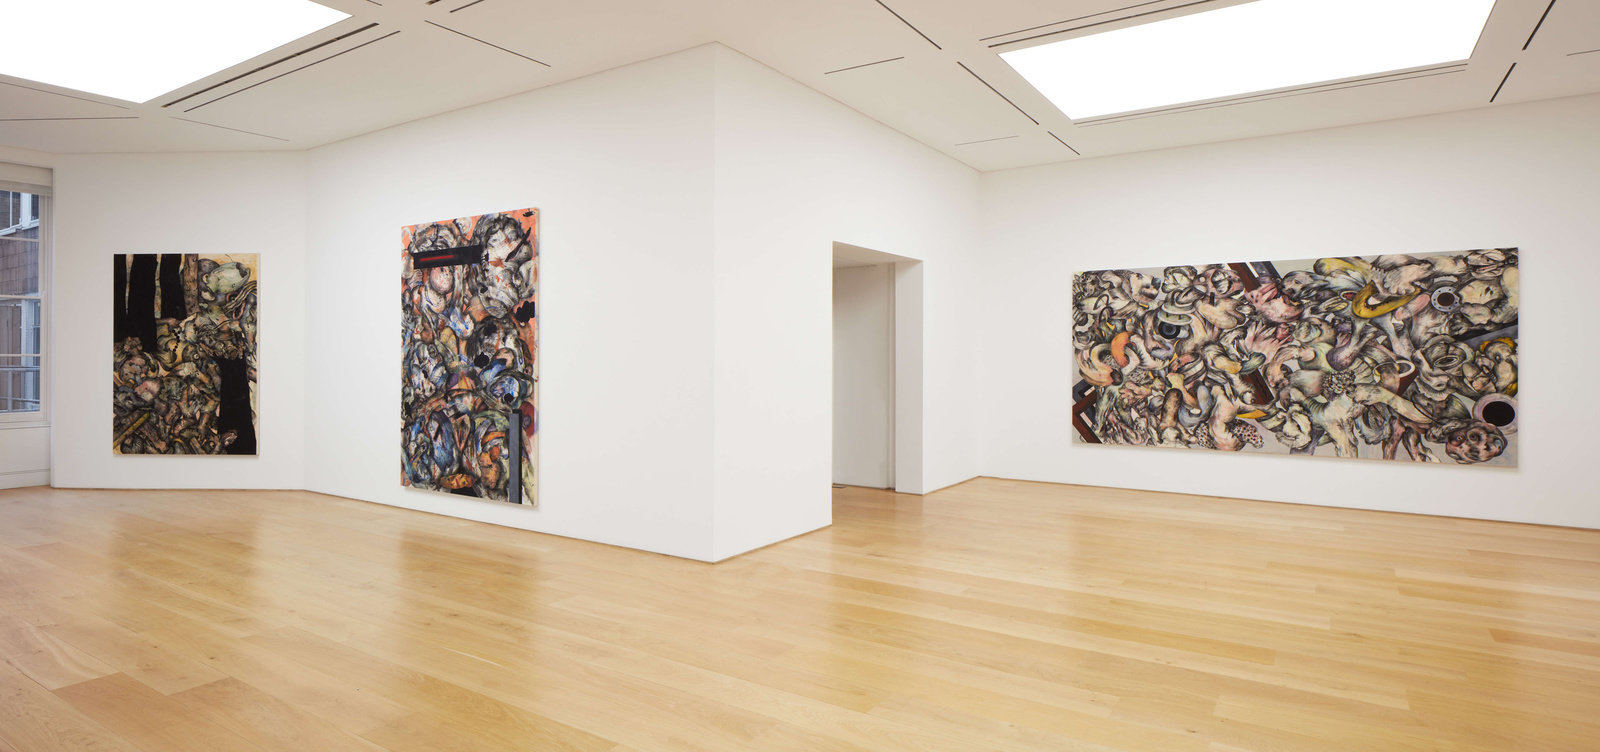 Installation view 02 by ahmed alsoudani marlborough contemporary london